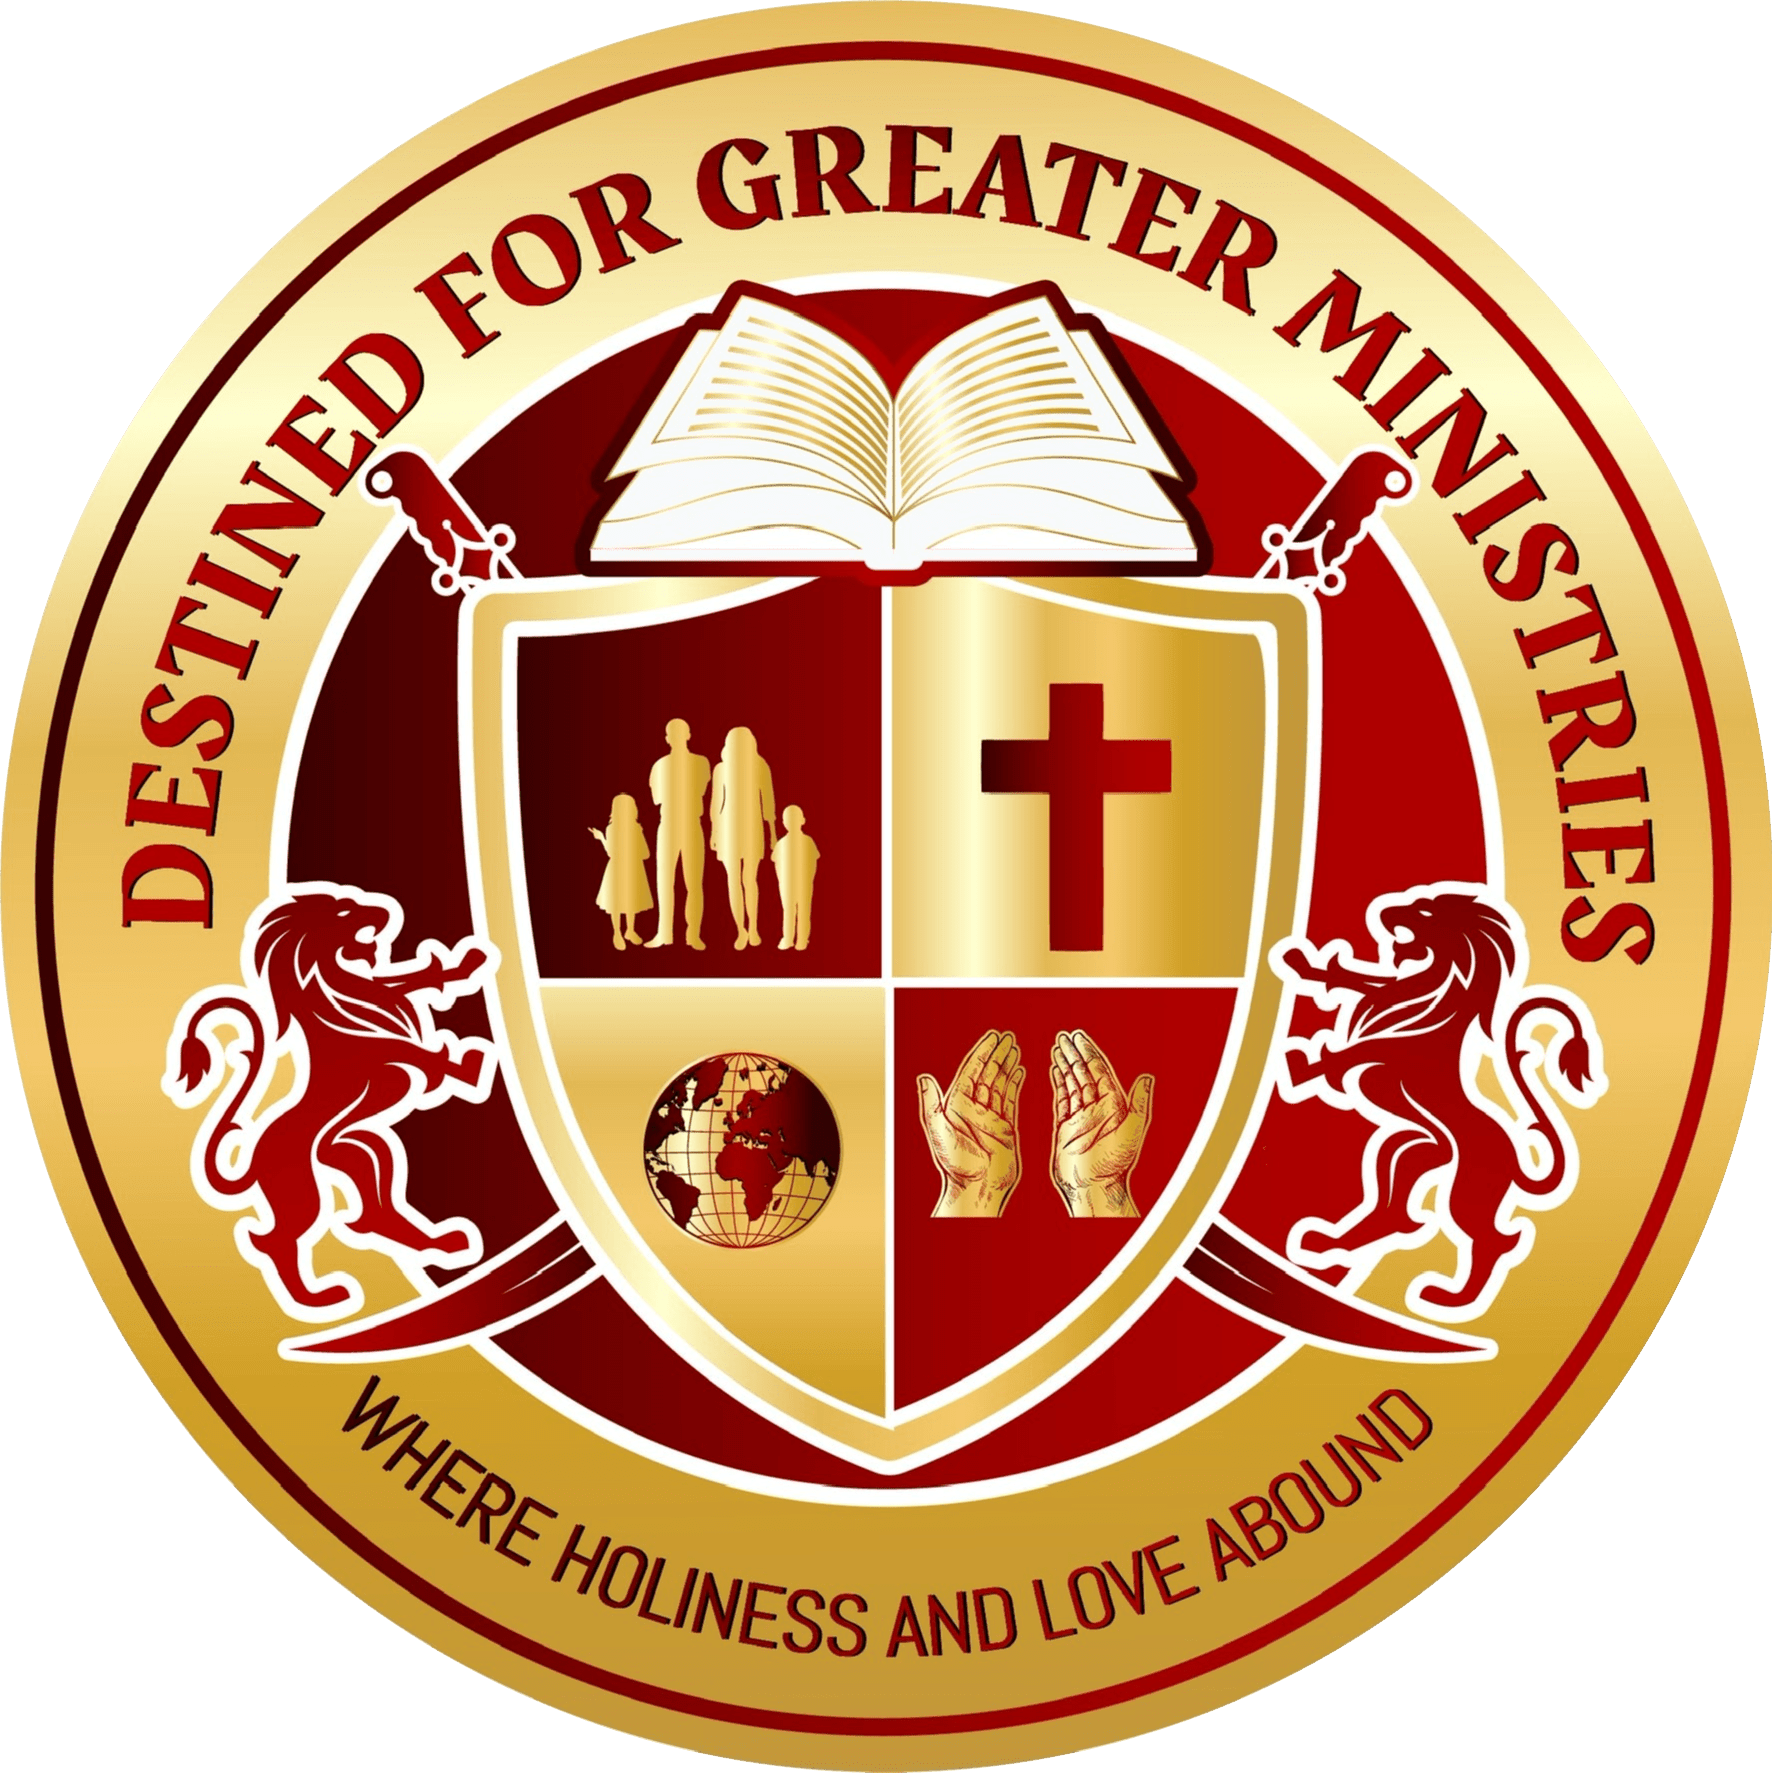 Destined for Greater Ministries